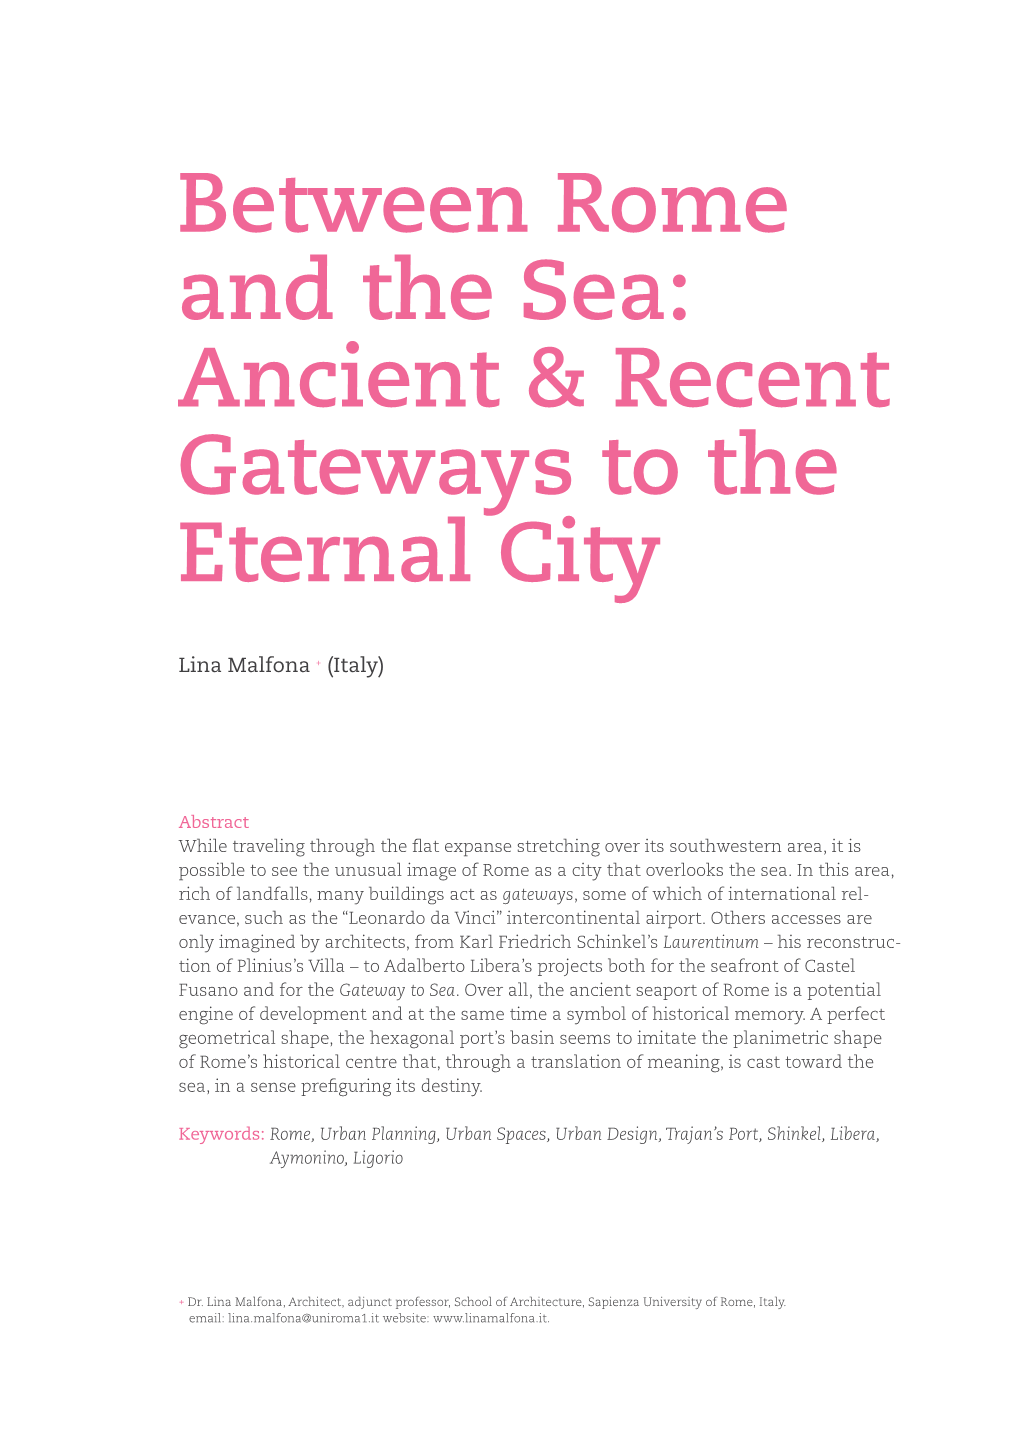 Between Rome and the Sea: Ancient & Recent Gateways to the Eternal City